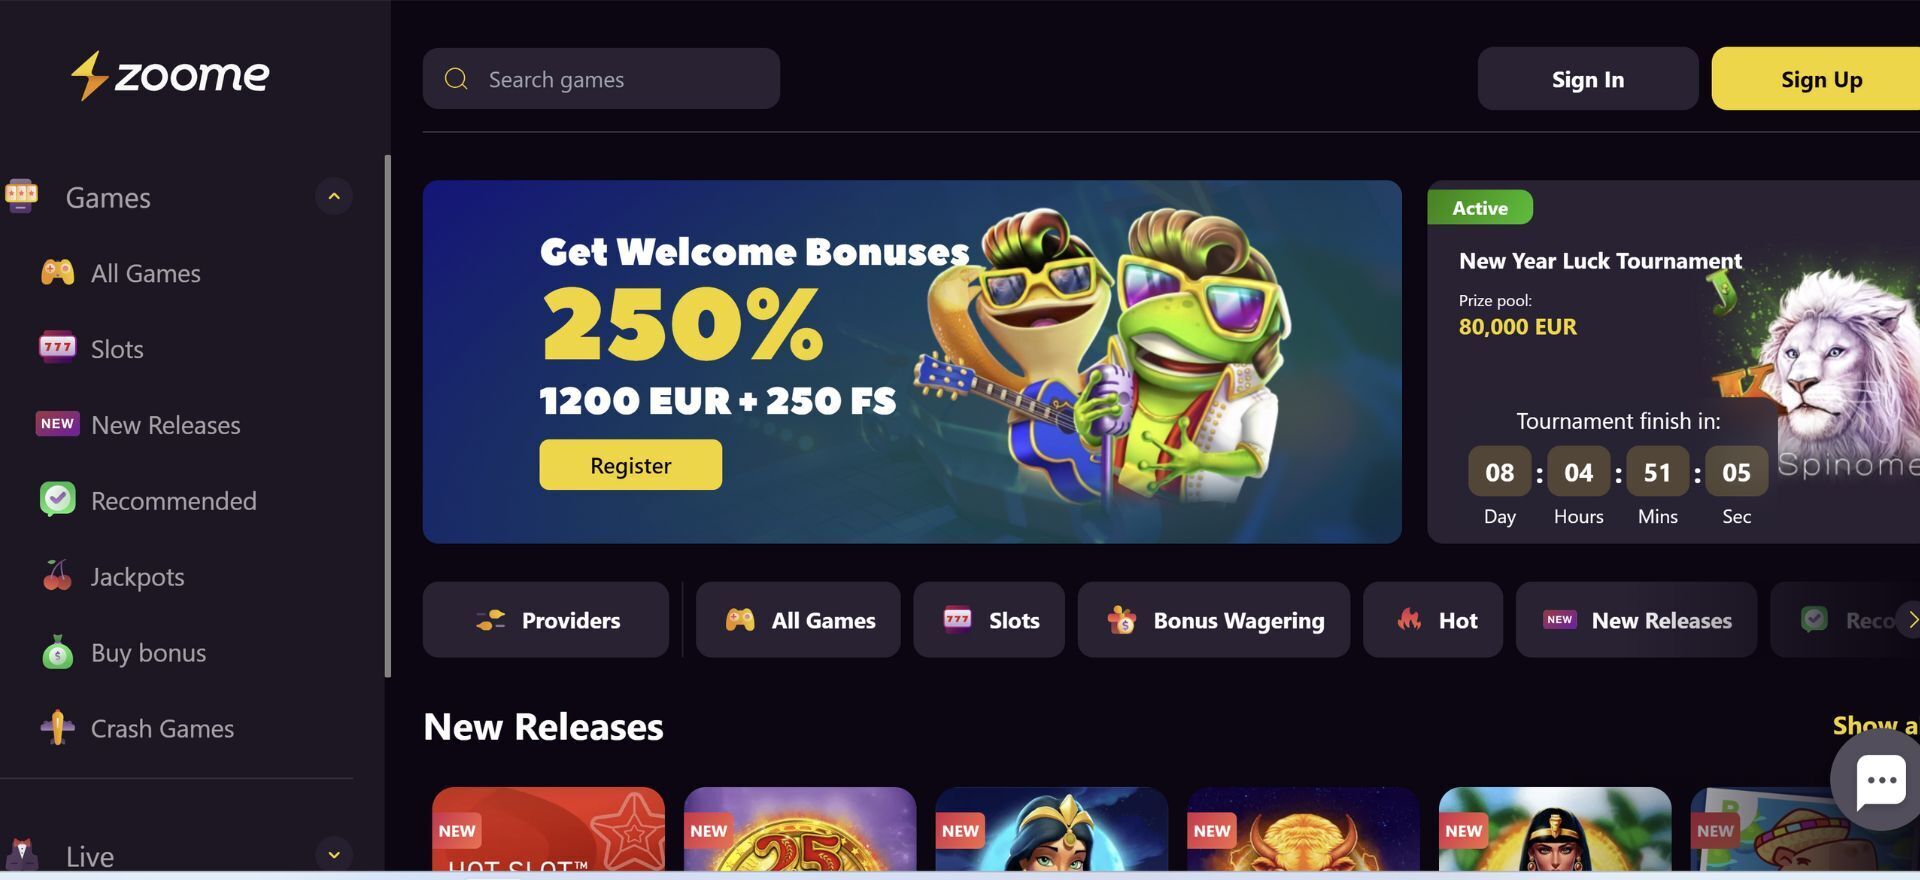 Zoome Casino Welcome Page